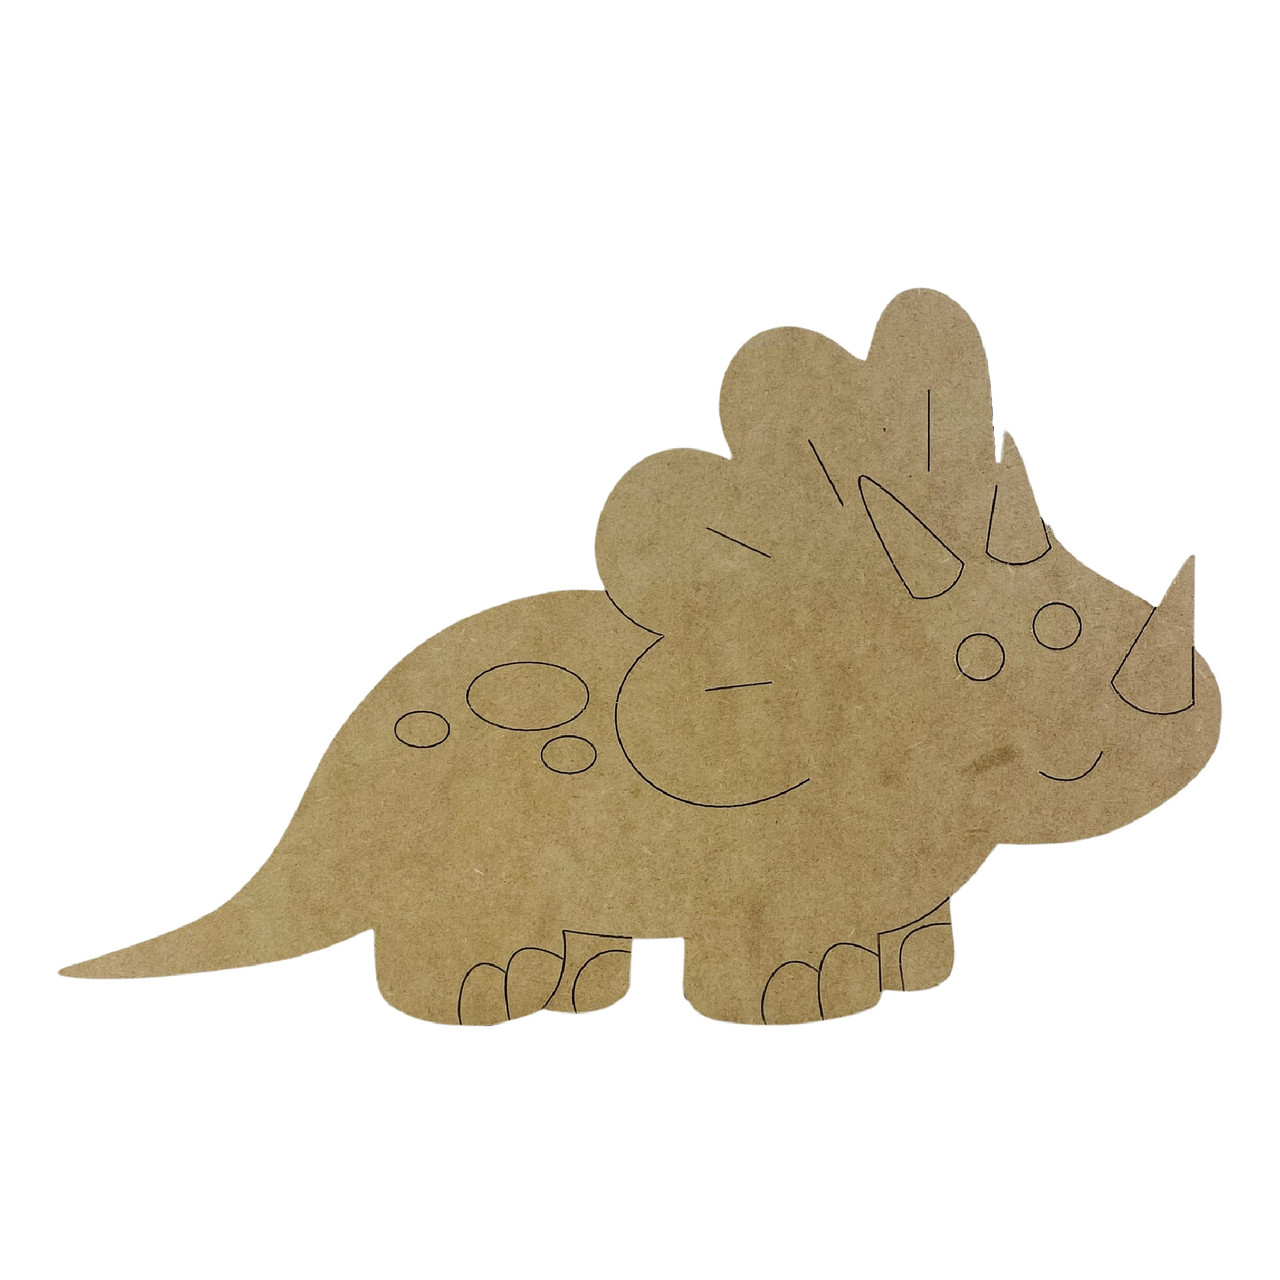 Pterodactyl Dinosaur Solid Wood Shape Unfinished Piece Cutout Craft DIY  Projects - 6.25 Inch Size - 1/8 Inch Thick